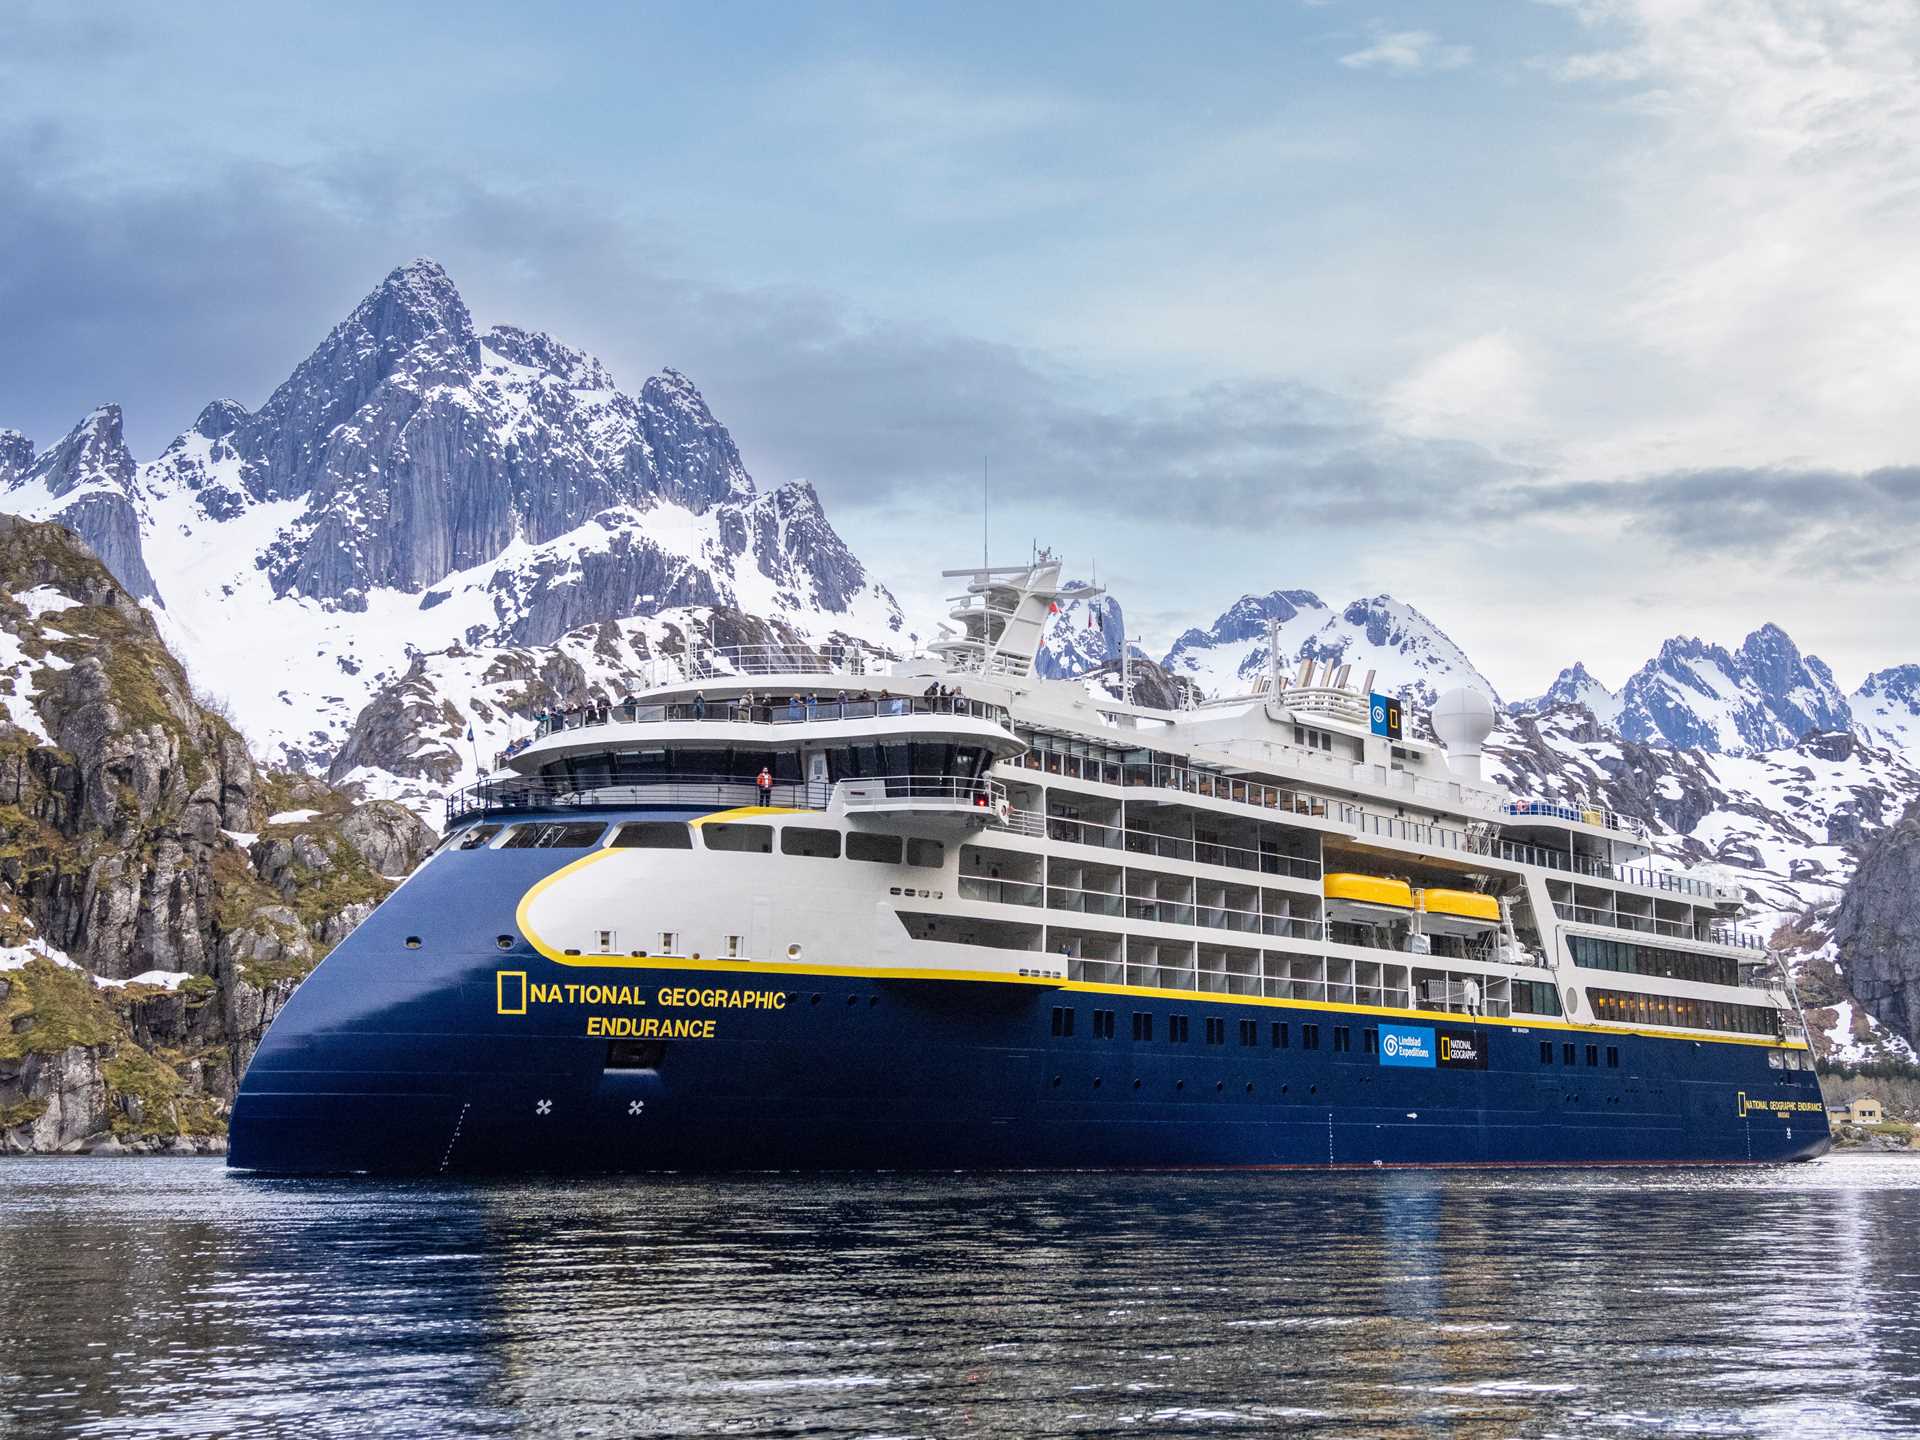 National Geographic Endurance parked in Trollfjord, Norway